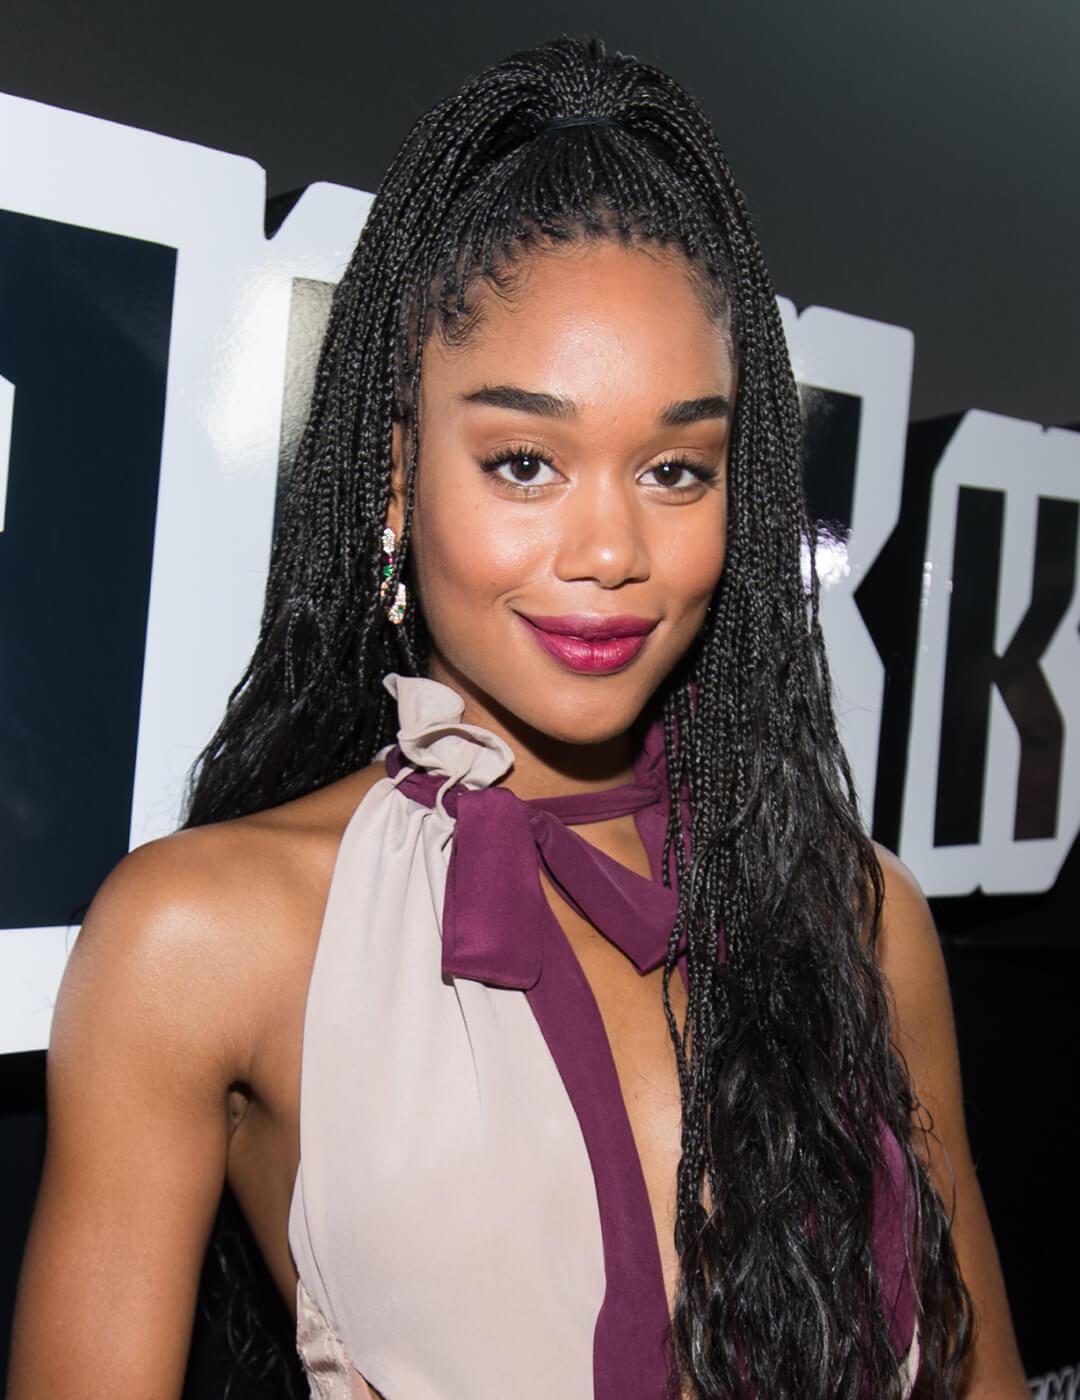 Laura Harrier rocking a Bohemian braids high ponytail hairstyle, burgundy and offwhite dress, and neutral eyeshadow makeup paired with berry lips